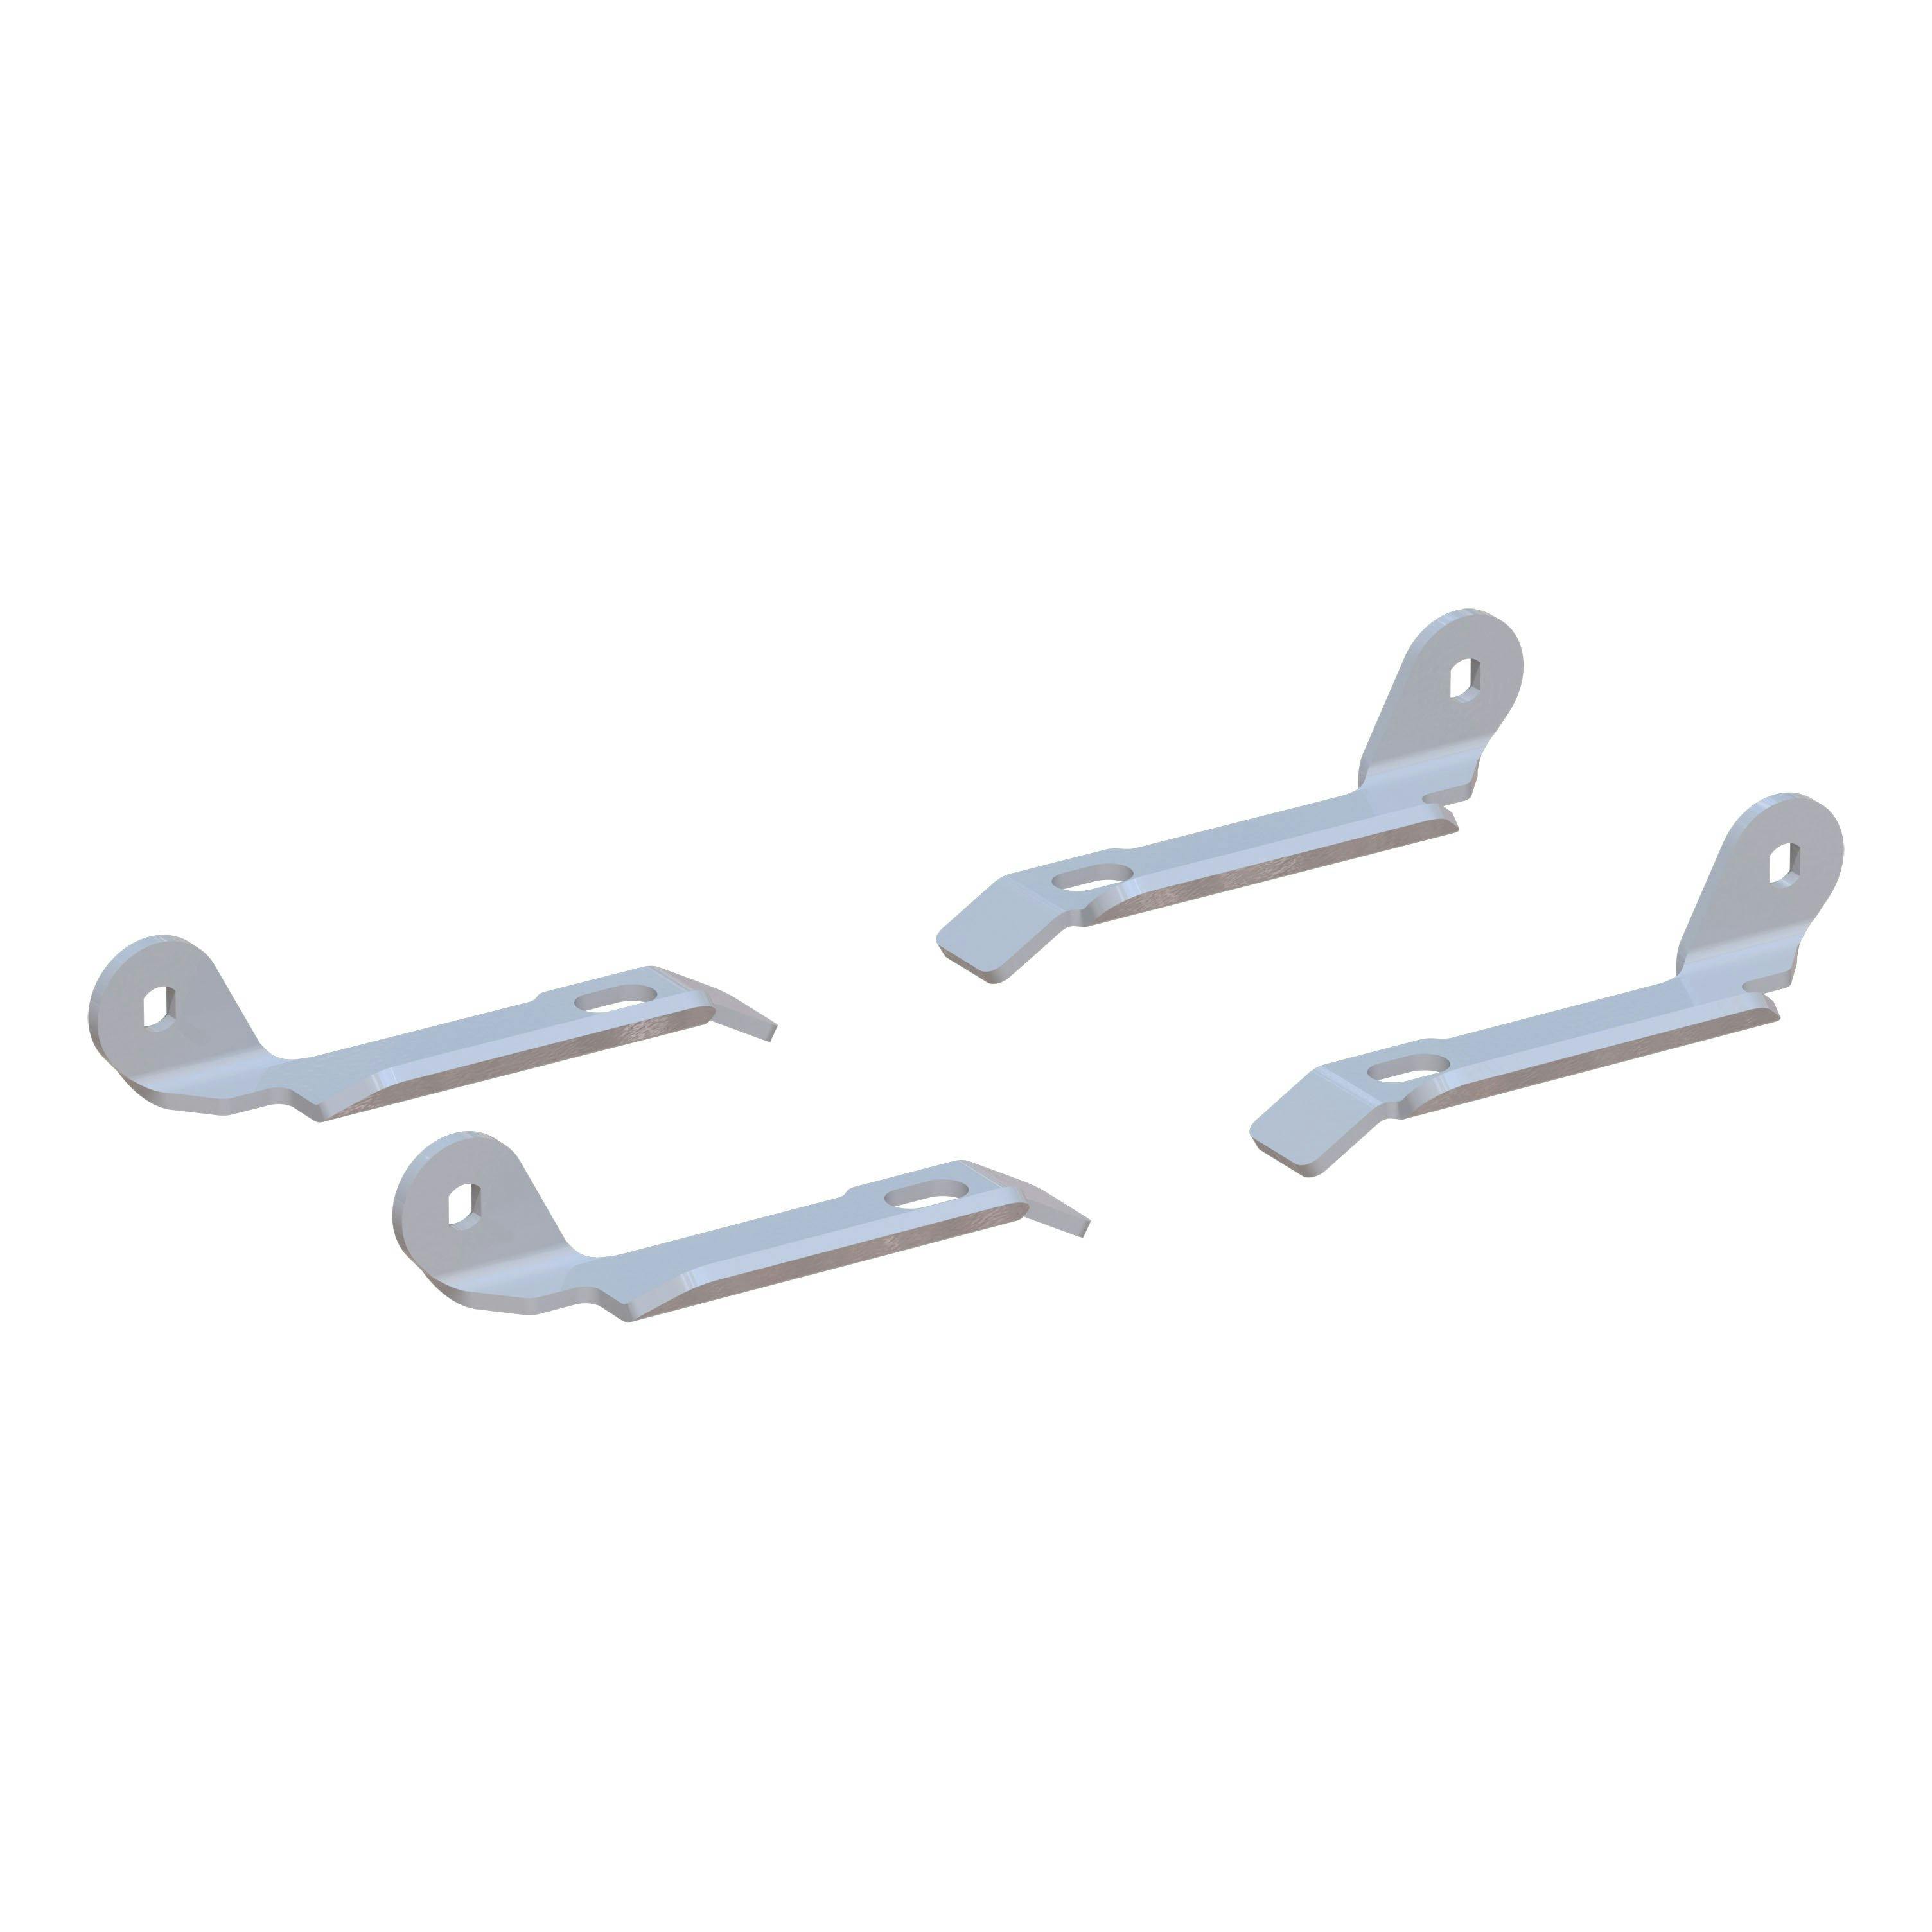 GMC CURT 19210 Replacement 5th Wheel Puck System Anchors Compatible with Chevrolet Fits 16025